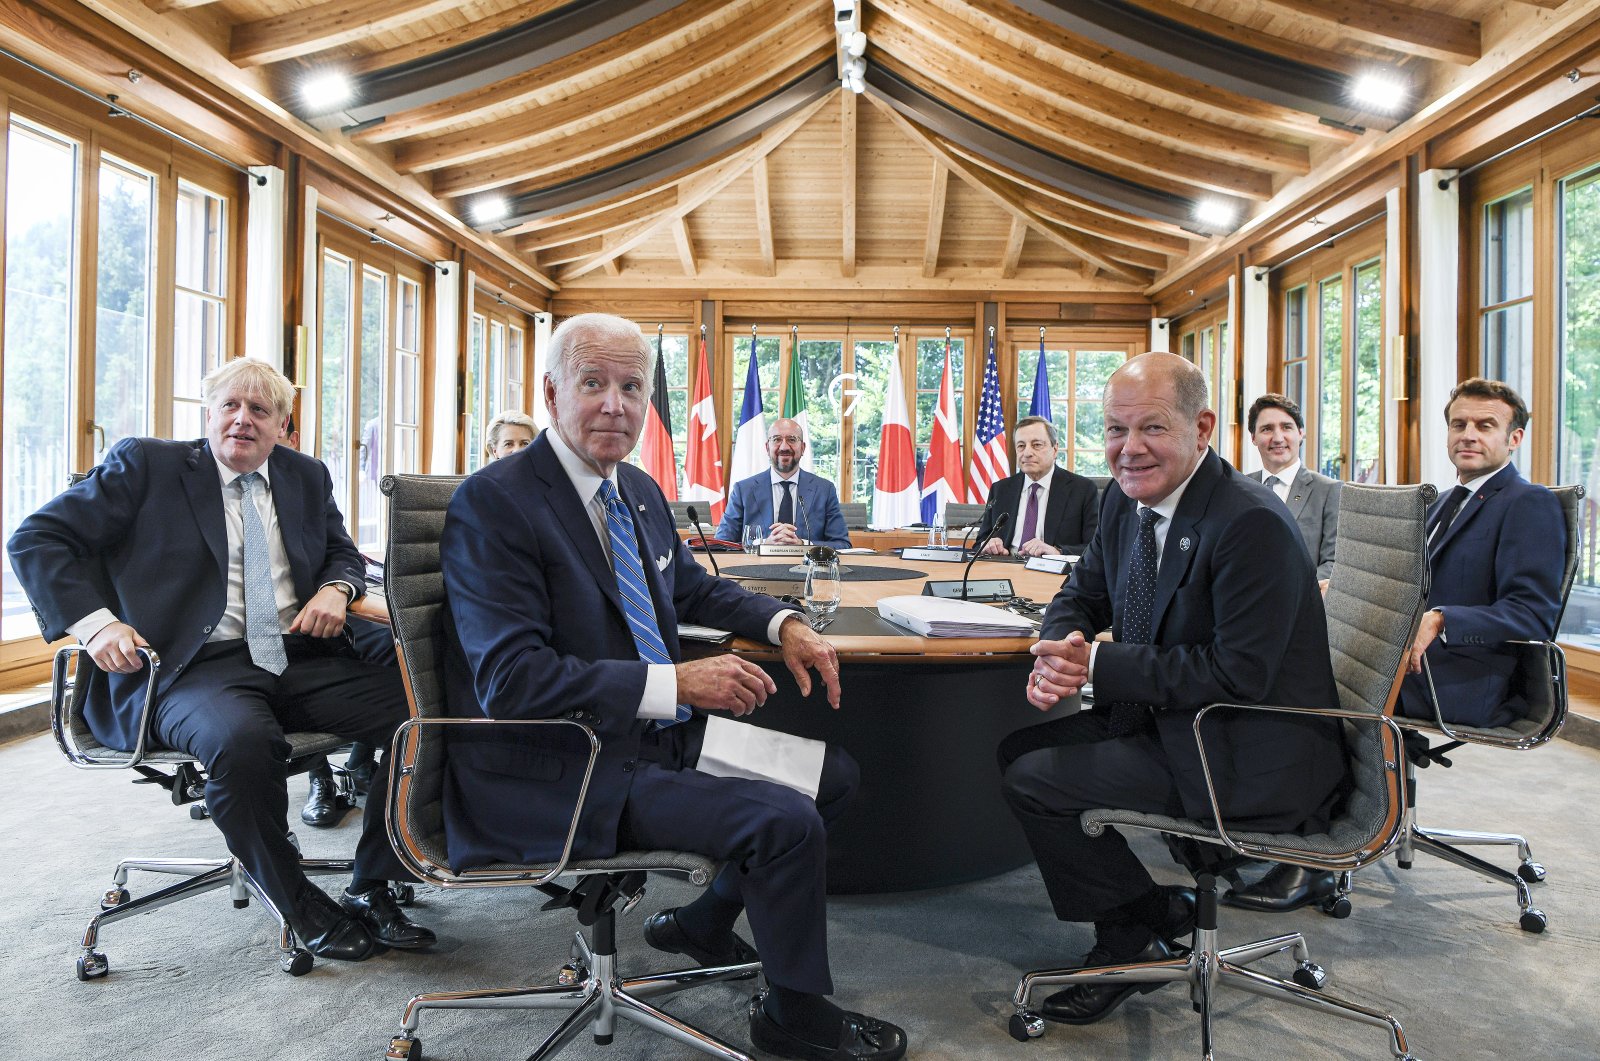 U.S. President Joe Biden (C) attends a working lunch with other G-7 leaders to discuss shaping the global economy in Castle Elmau, in Elmau, Germany, June 26, 2022. (AP Photo)